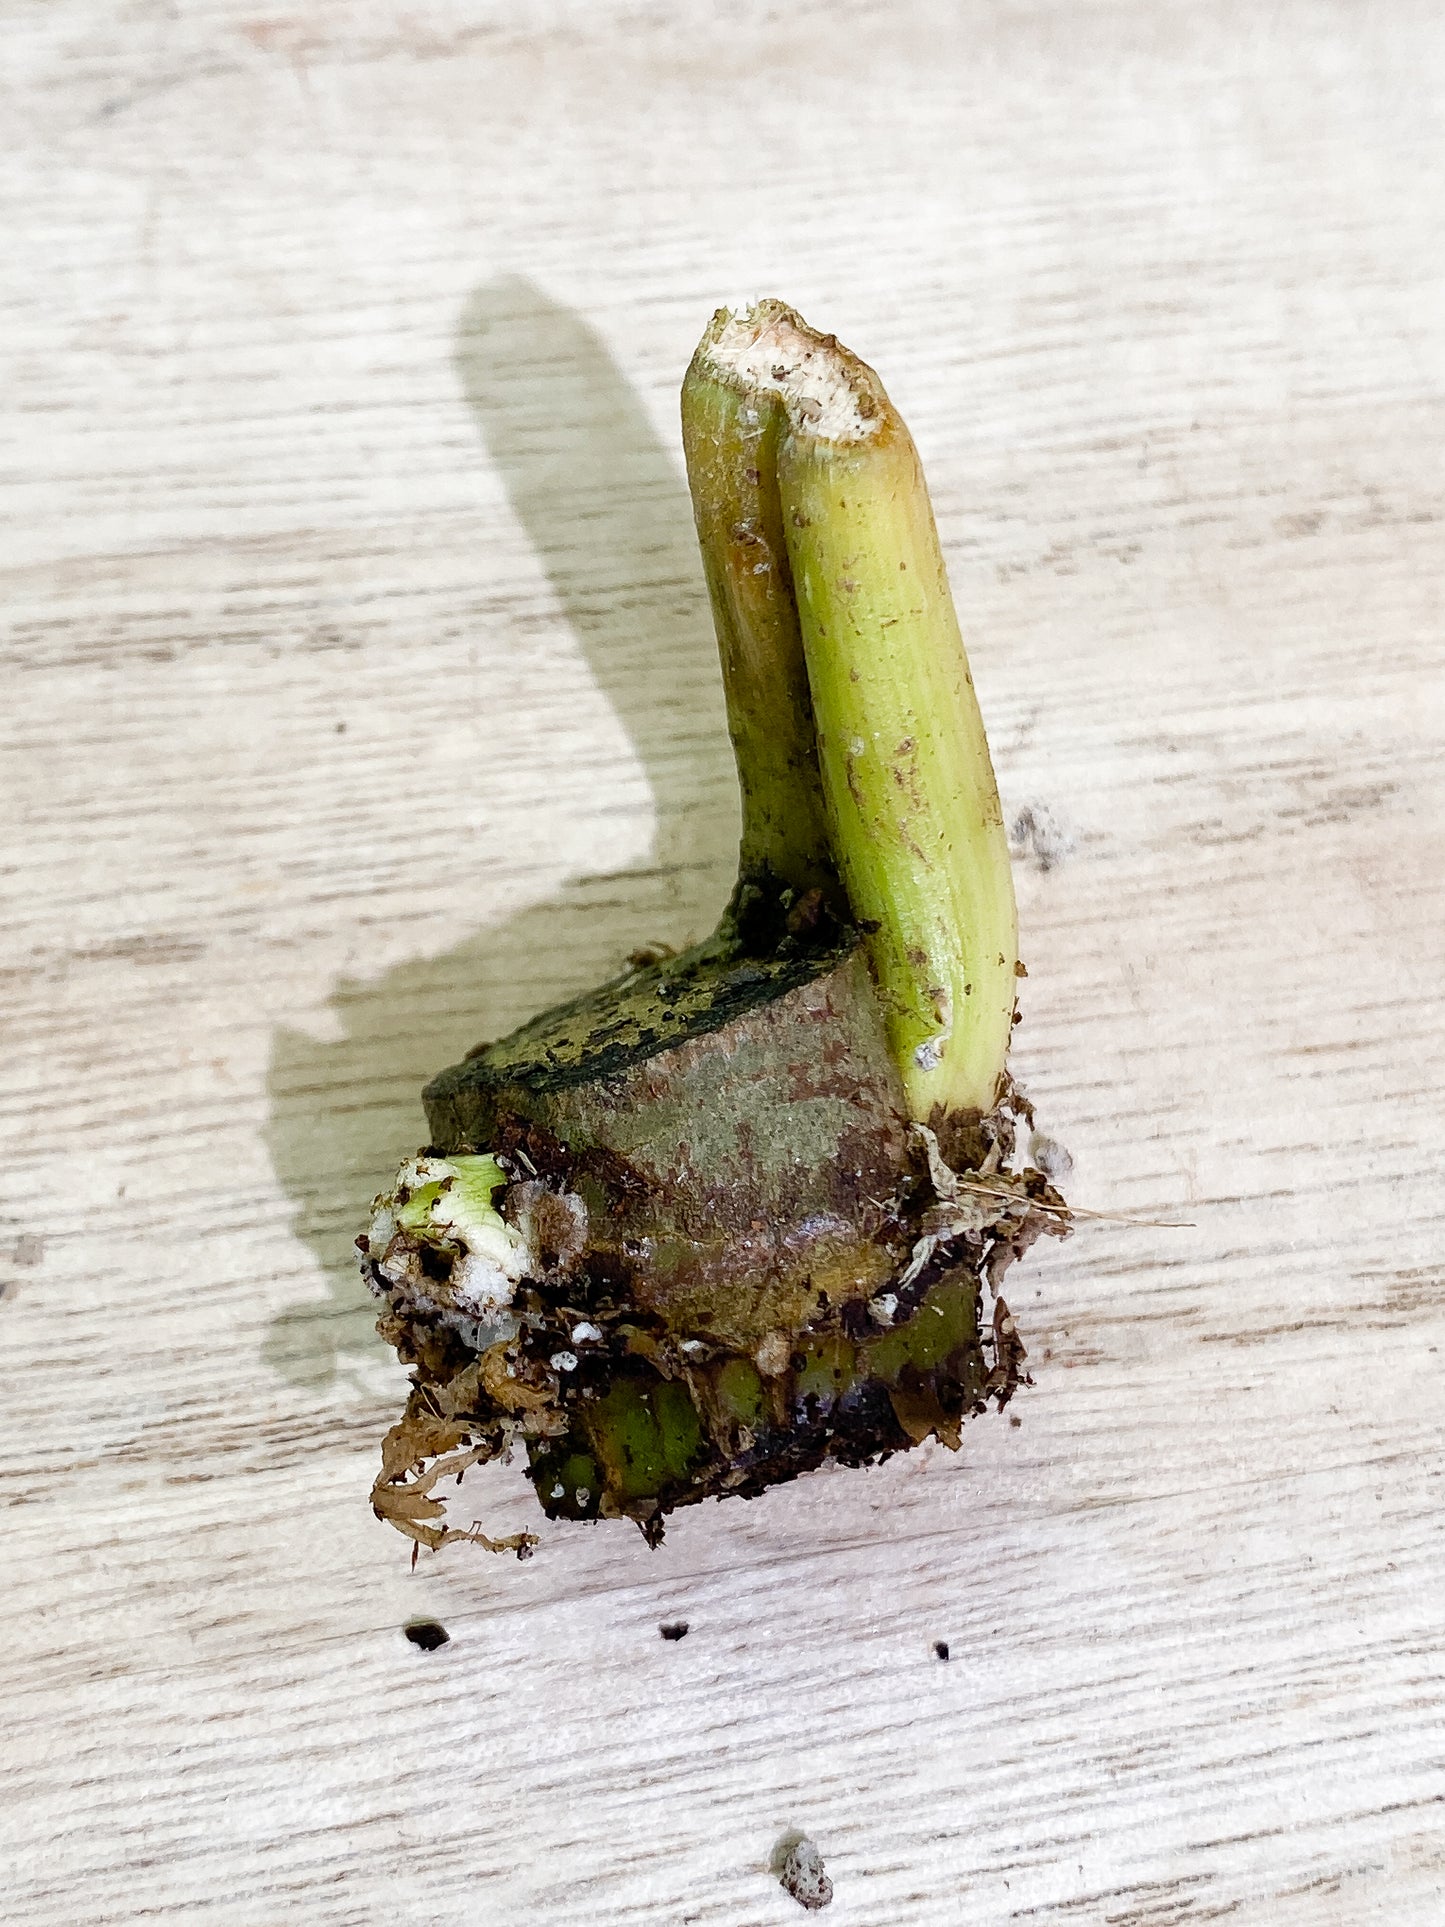 DO NOT BUY: Philodendron Gloriosum unrooted node 1 sprout